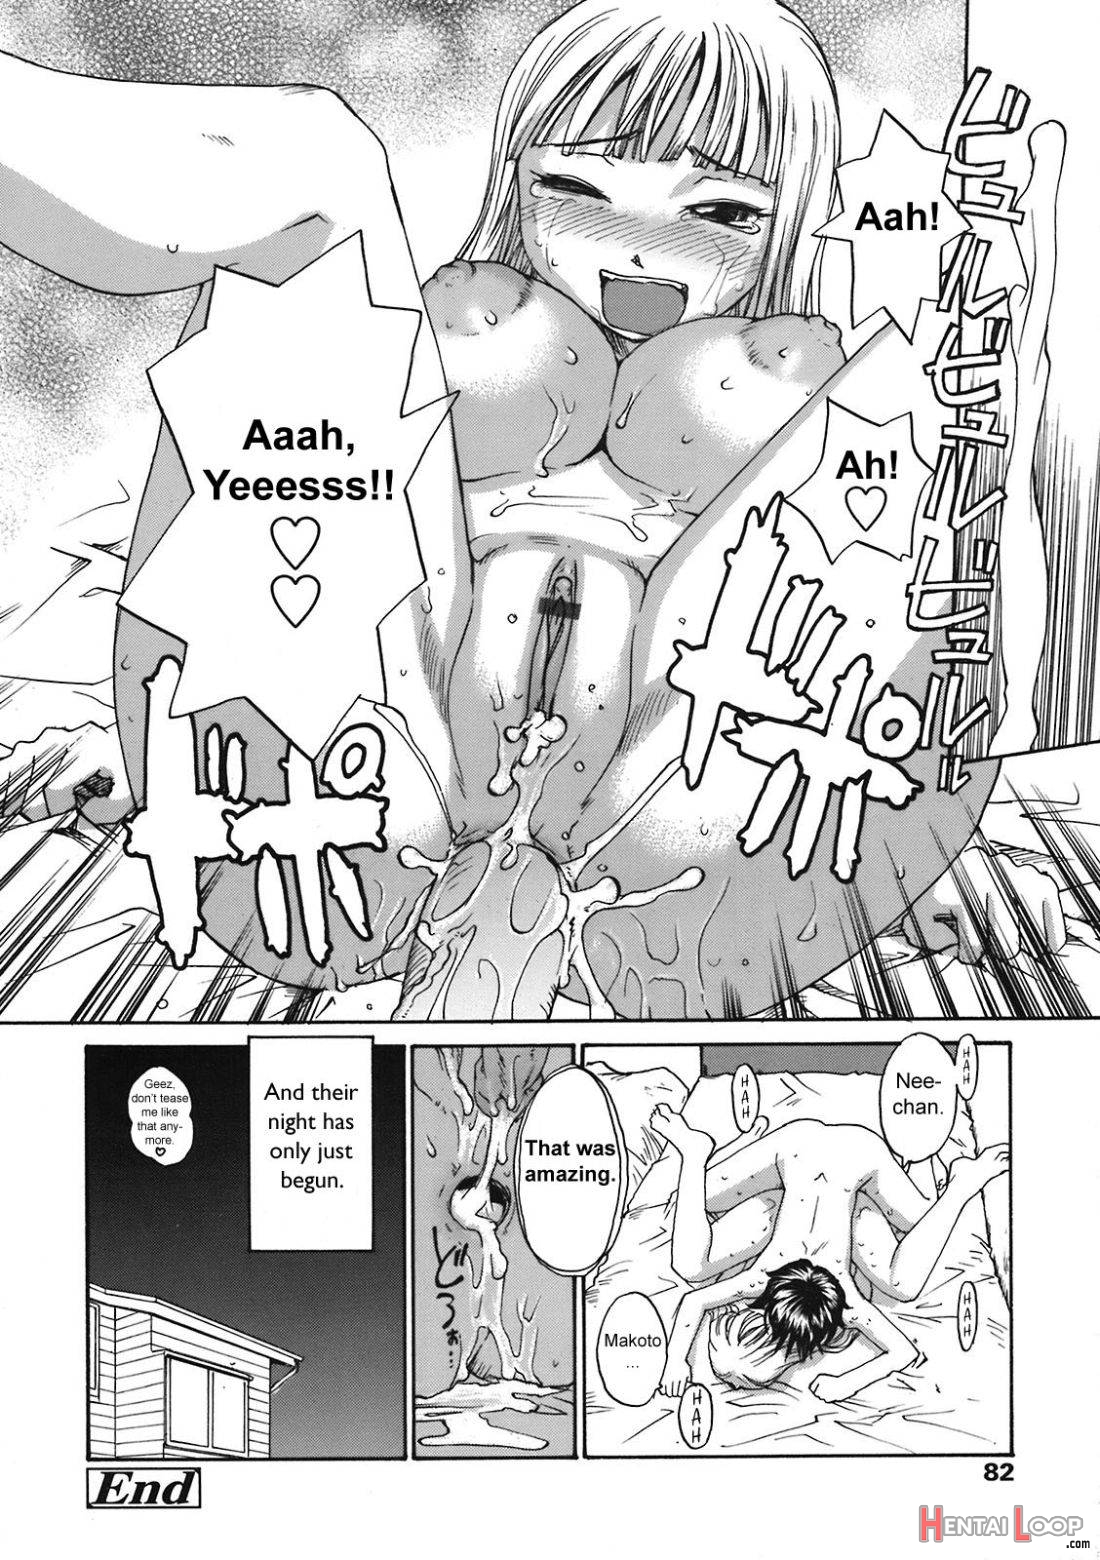 Back to Nee-chan page 16